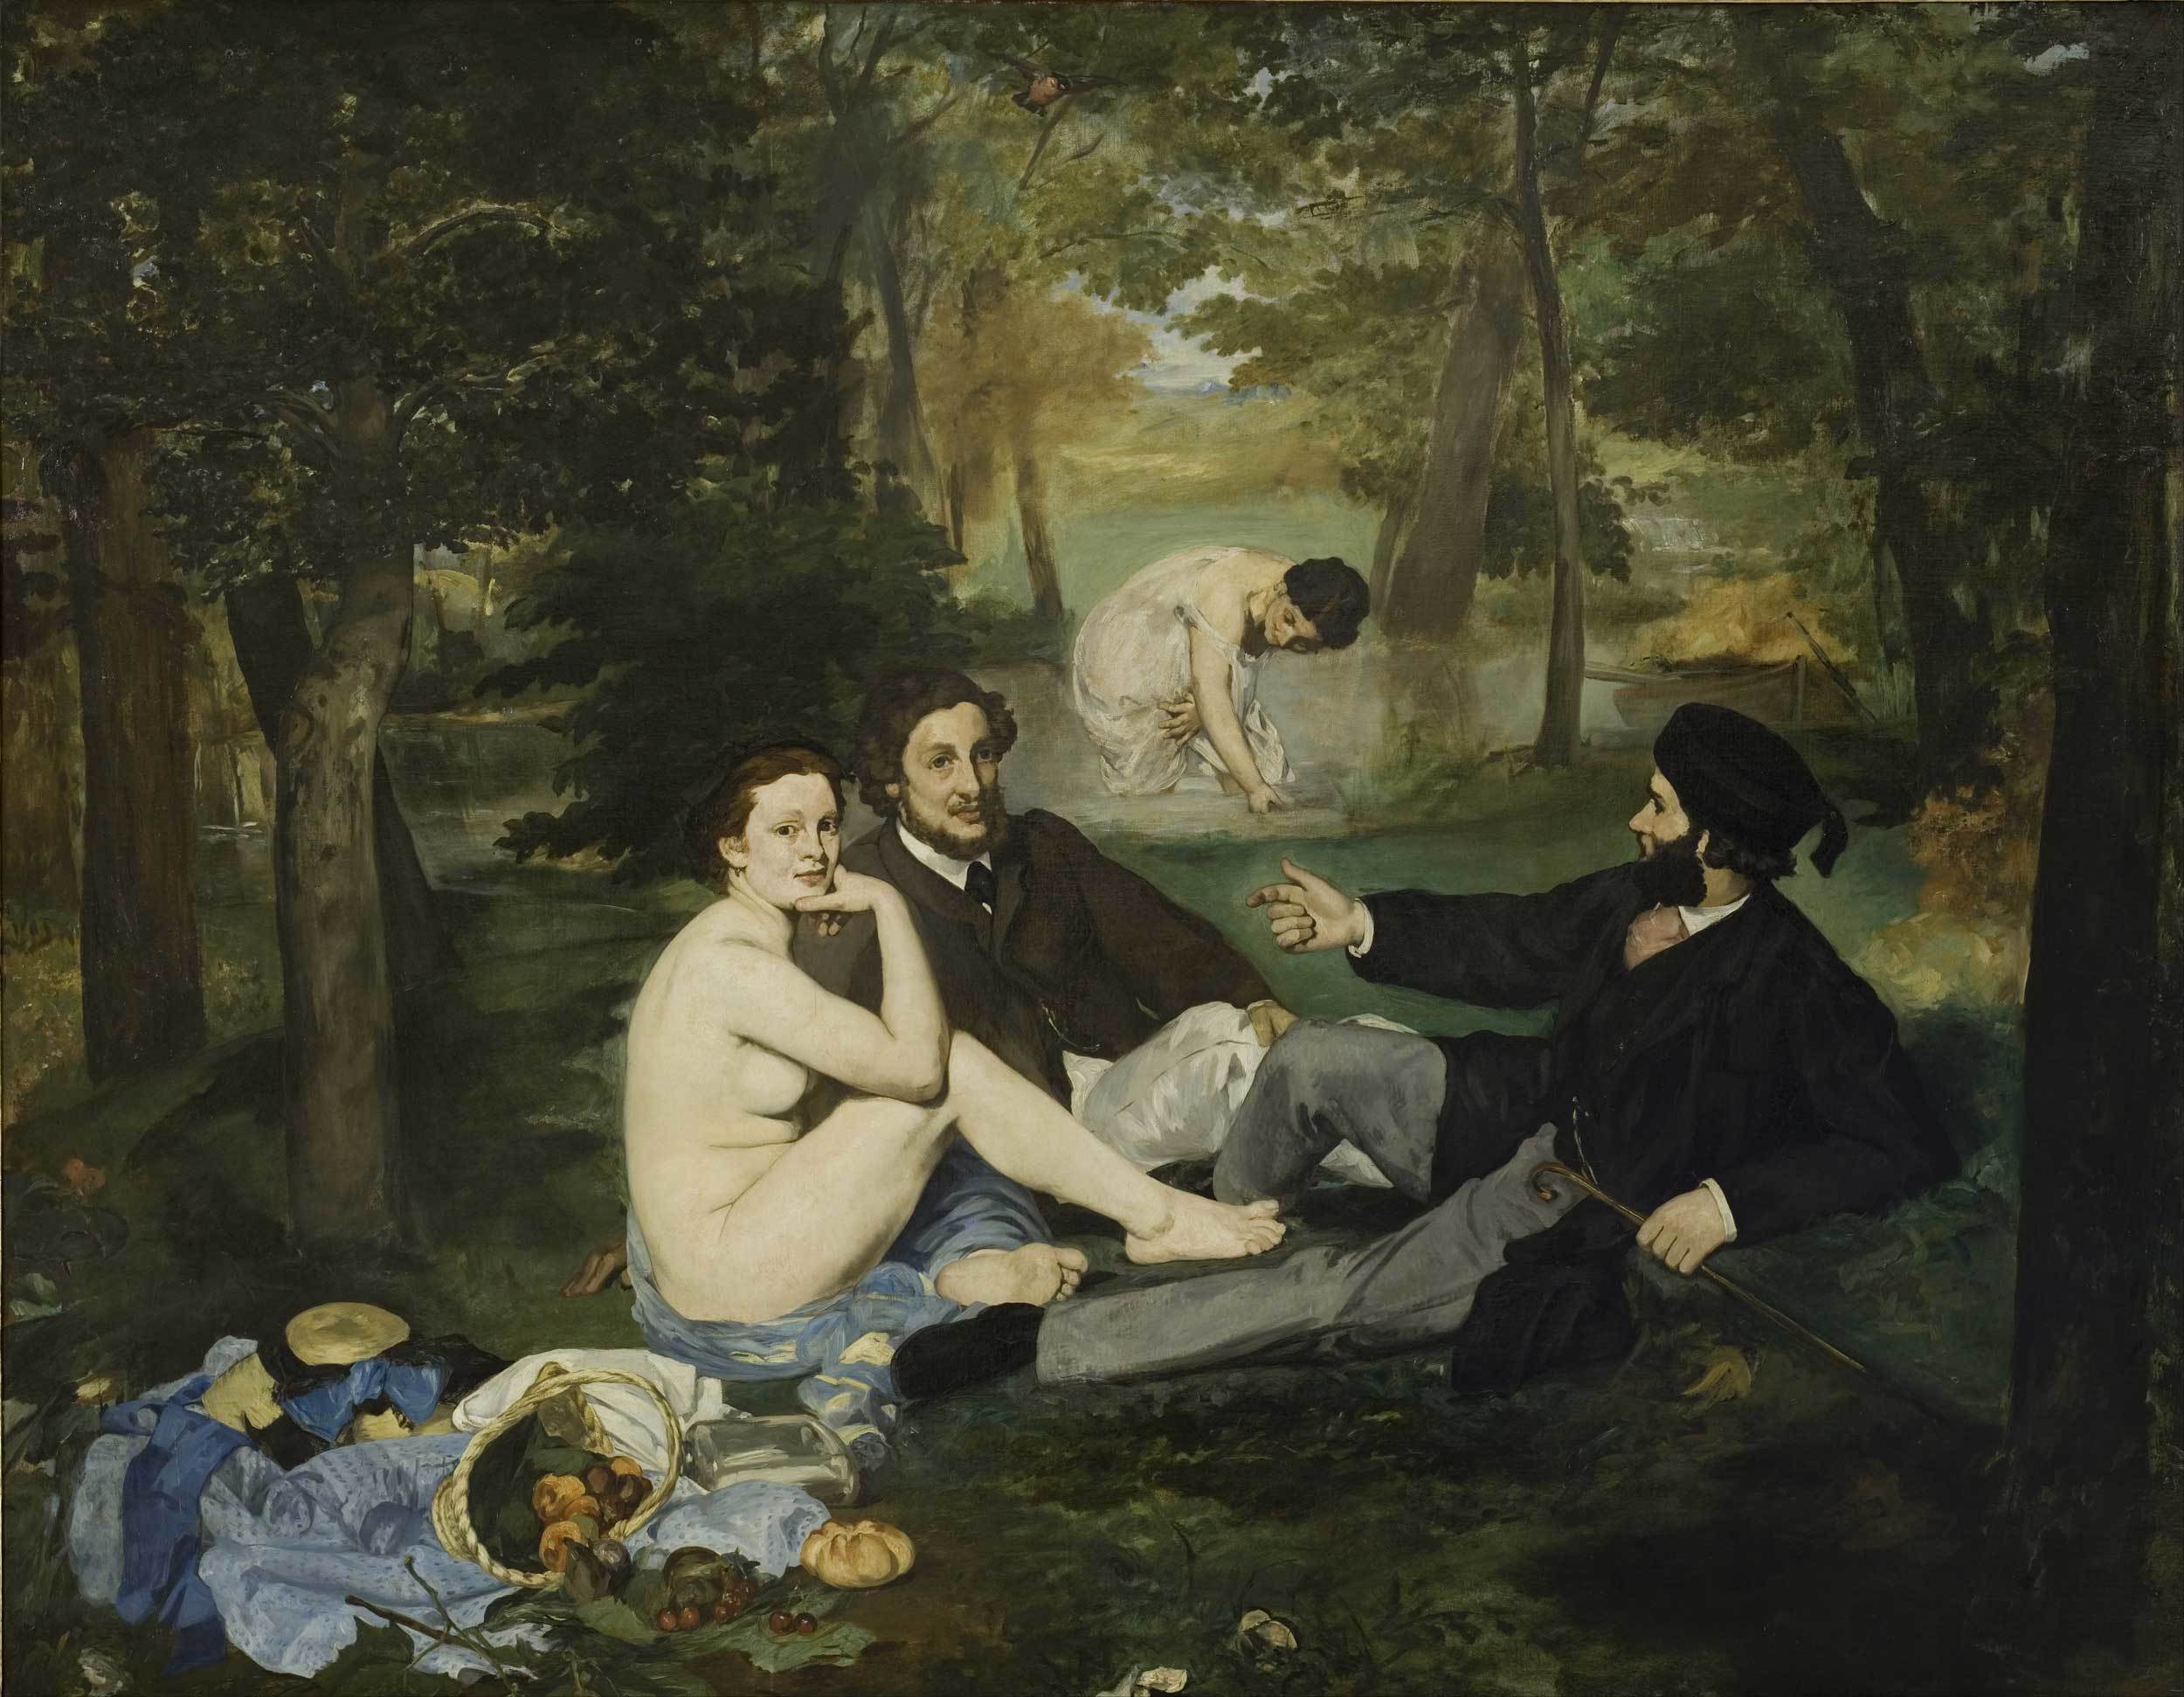 Edouard Manet - Luncheon on the Grass, 1863